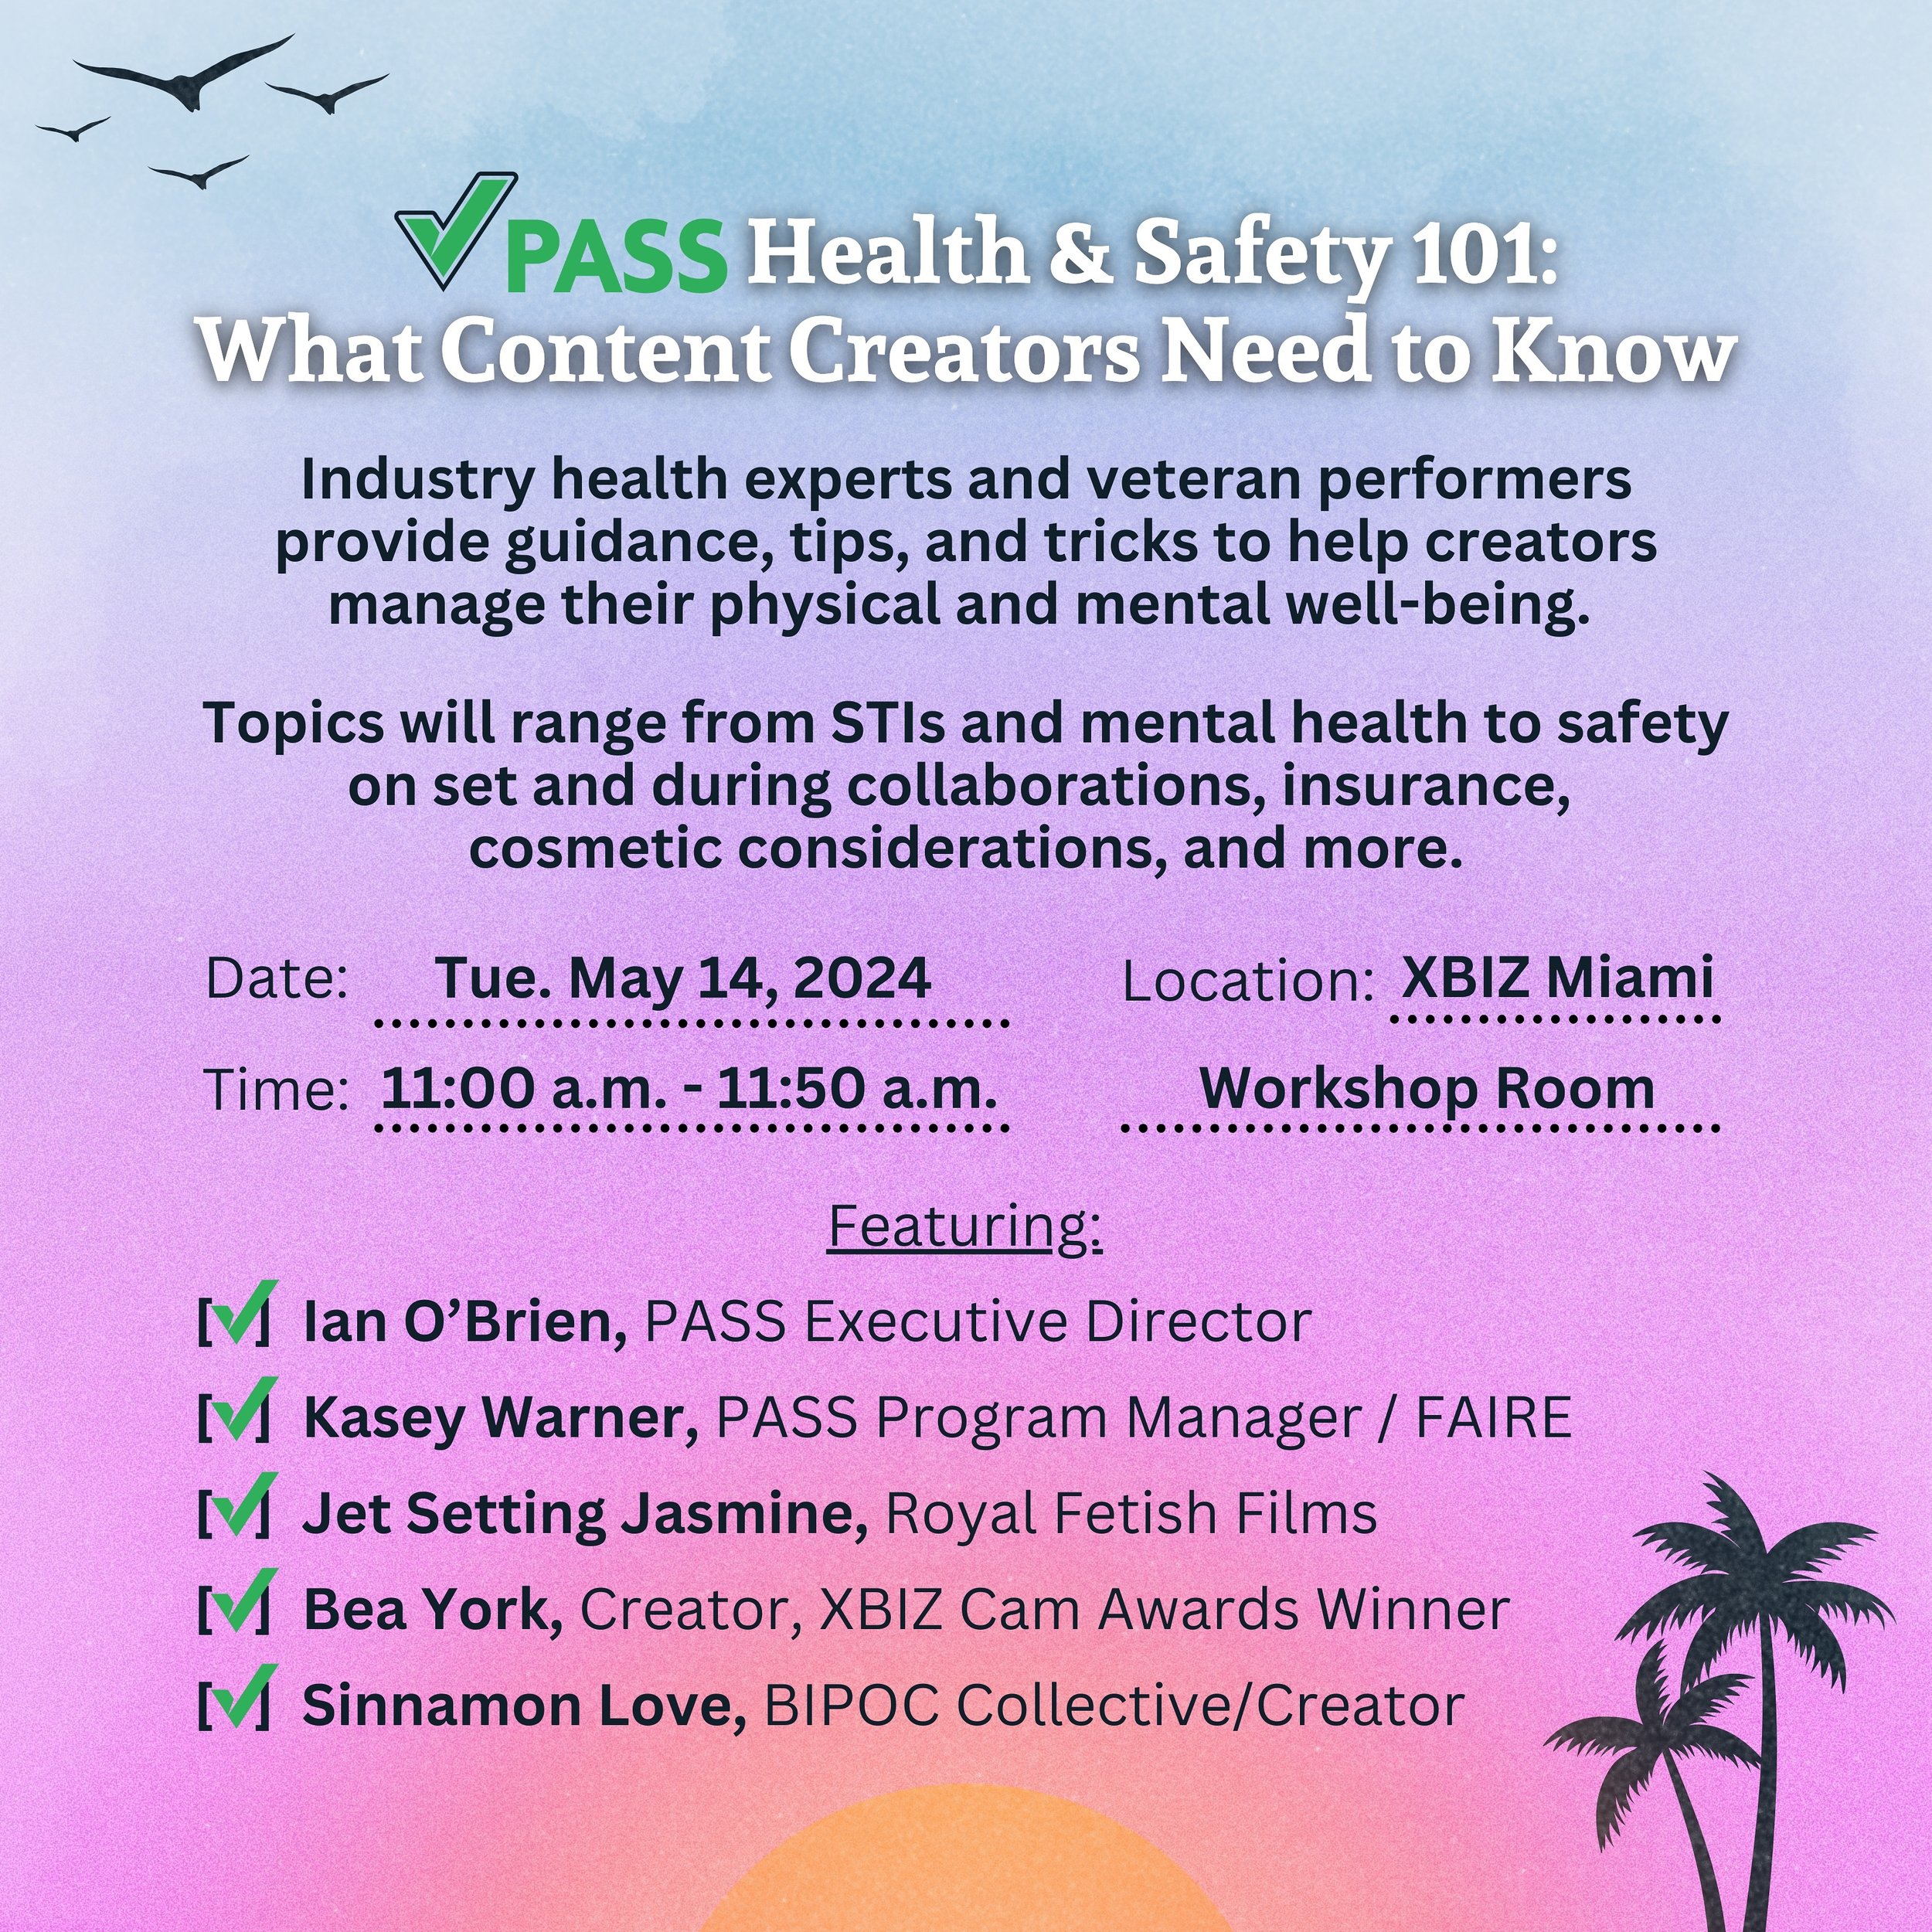 Join us in the Workshop Room at @xbizshows Miami on Tuesday, May 14 at 11:00 a.m. Questions welcomed! 🌴

Featuring:
✅ Ian O&rsquo;Brien
✅ @realkaseywarner 
✅ @jetsettingjasminetm
✅ @ubeayork 
✅ @iamsinnamonlove 

#PASScertified #healthandsafety #non